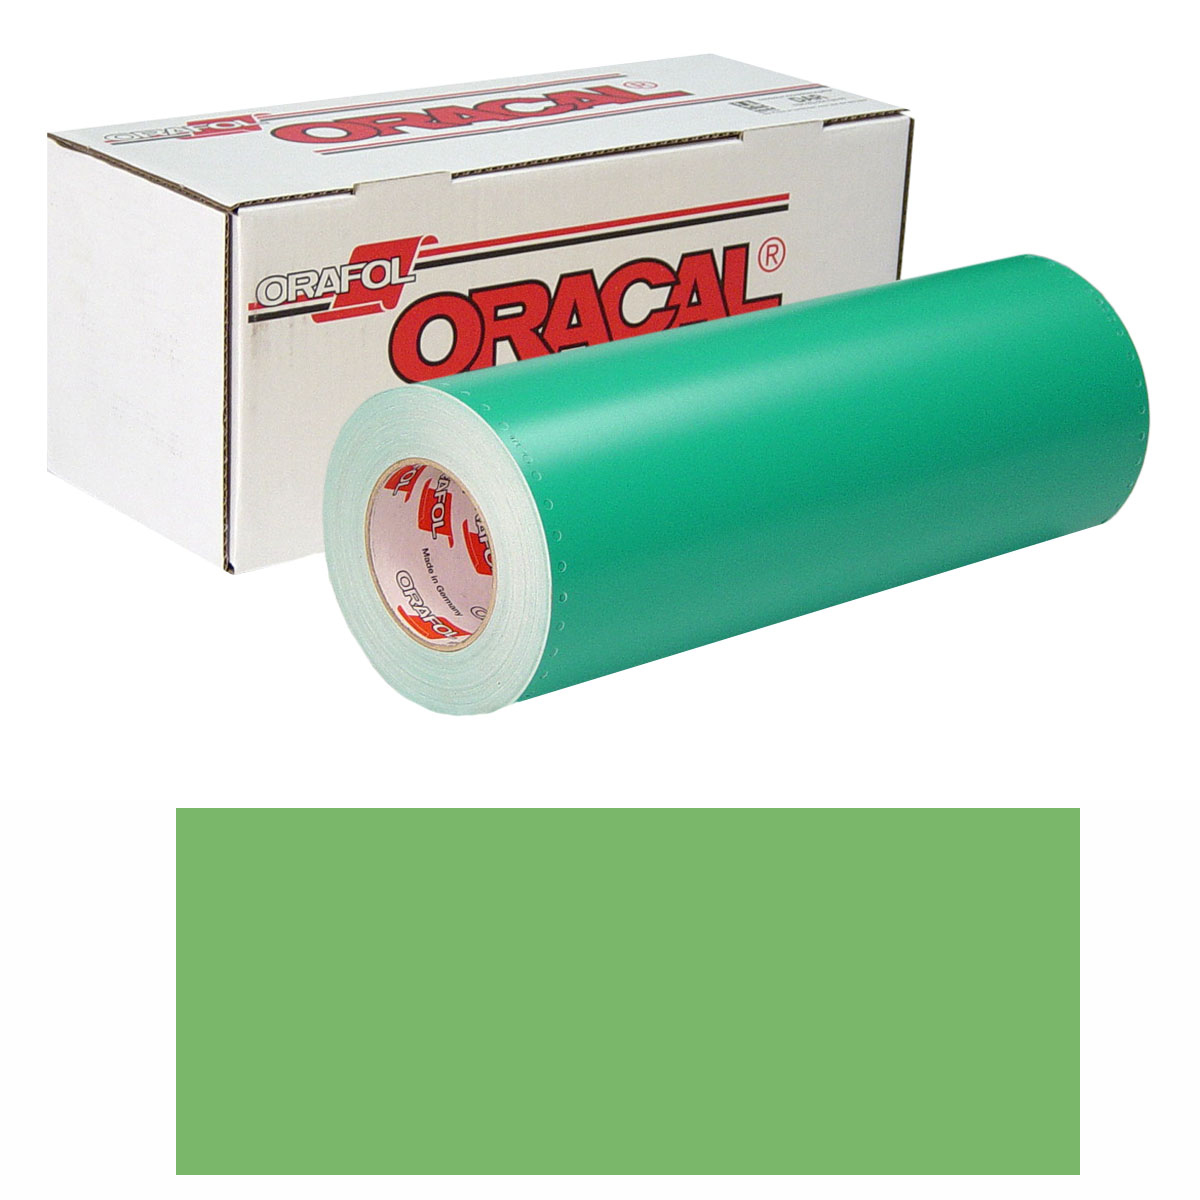 ORACAL 8500 30in X 10yd 063 Lime-Tree Green